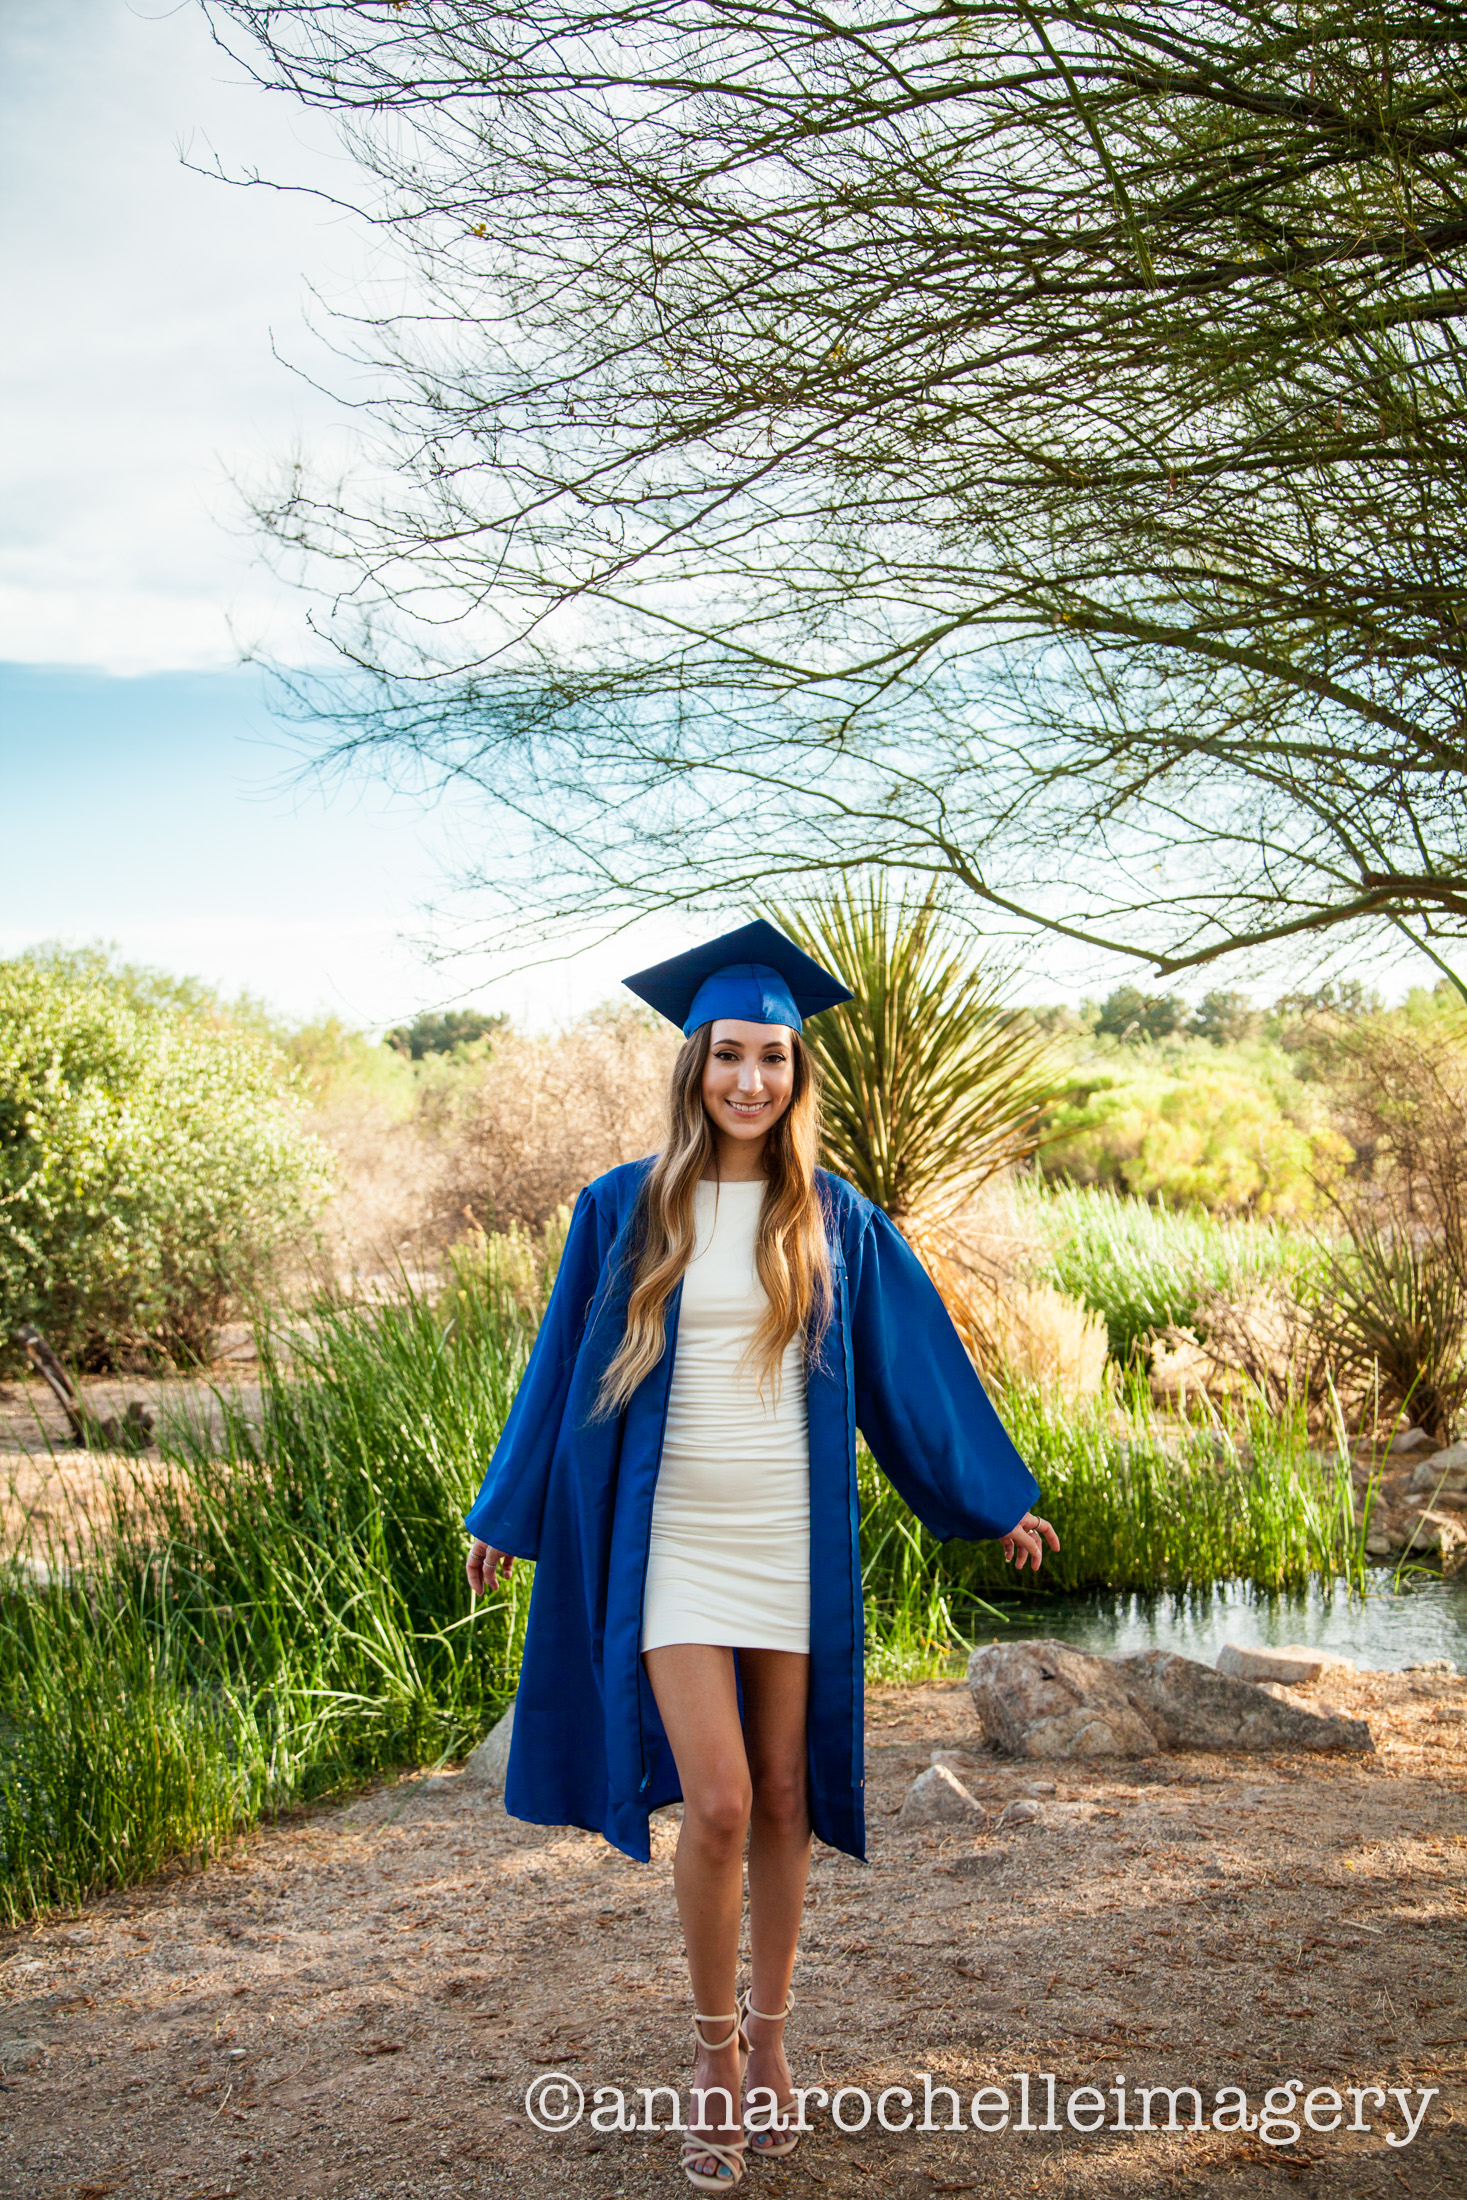 cap-gown-college-graduate-anna-rochelle-imagery.jpg